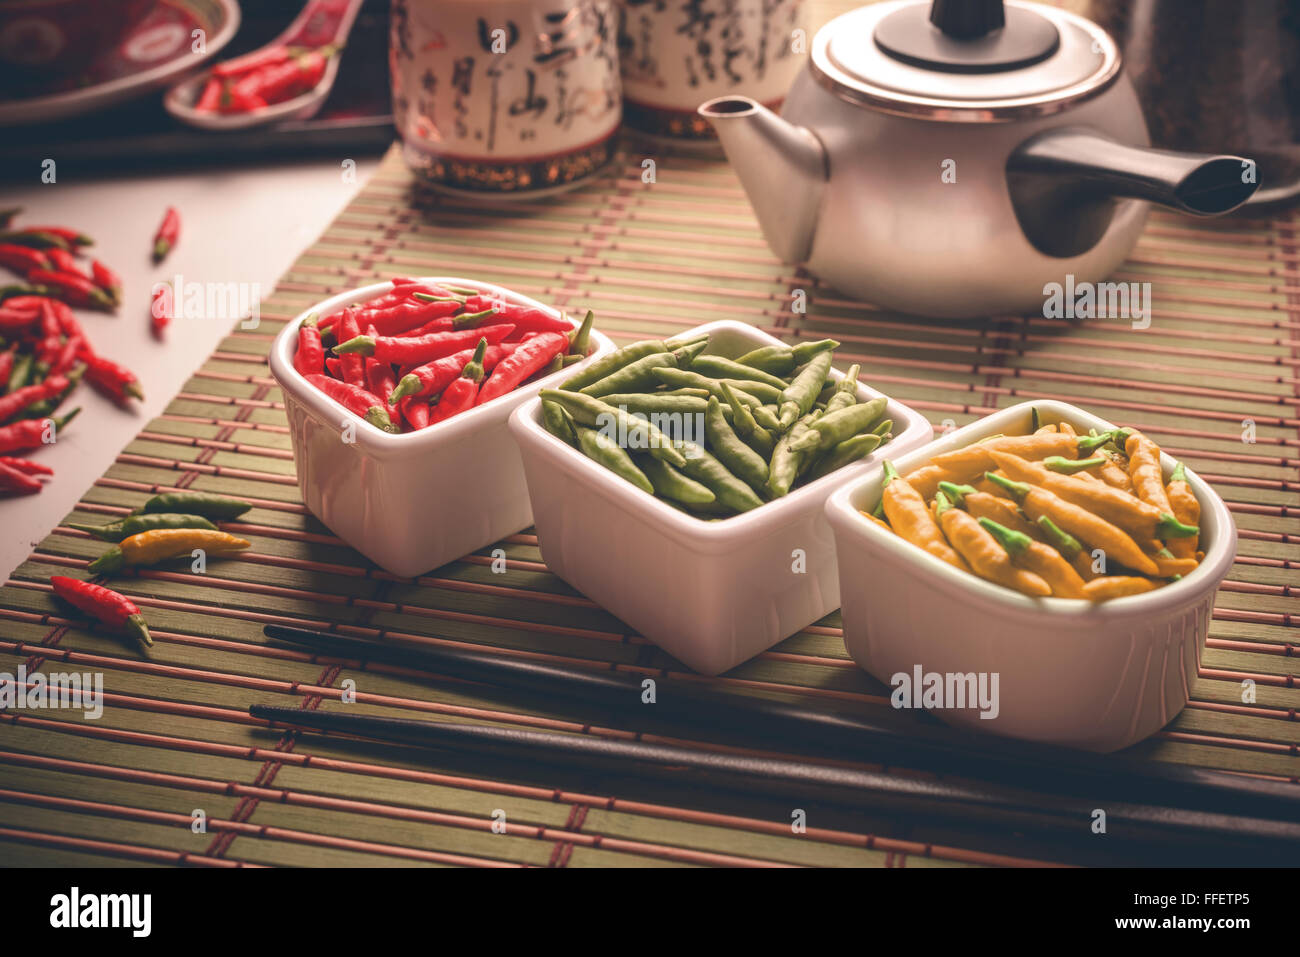 Red, green and yellow peppers on an oriental style table. Depth of field with focus on center of the image. Stock Photo